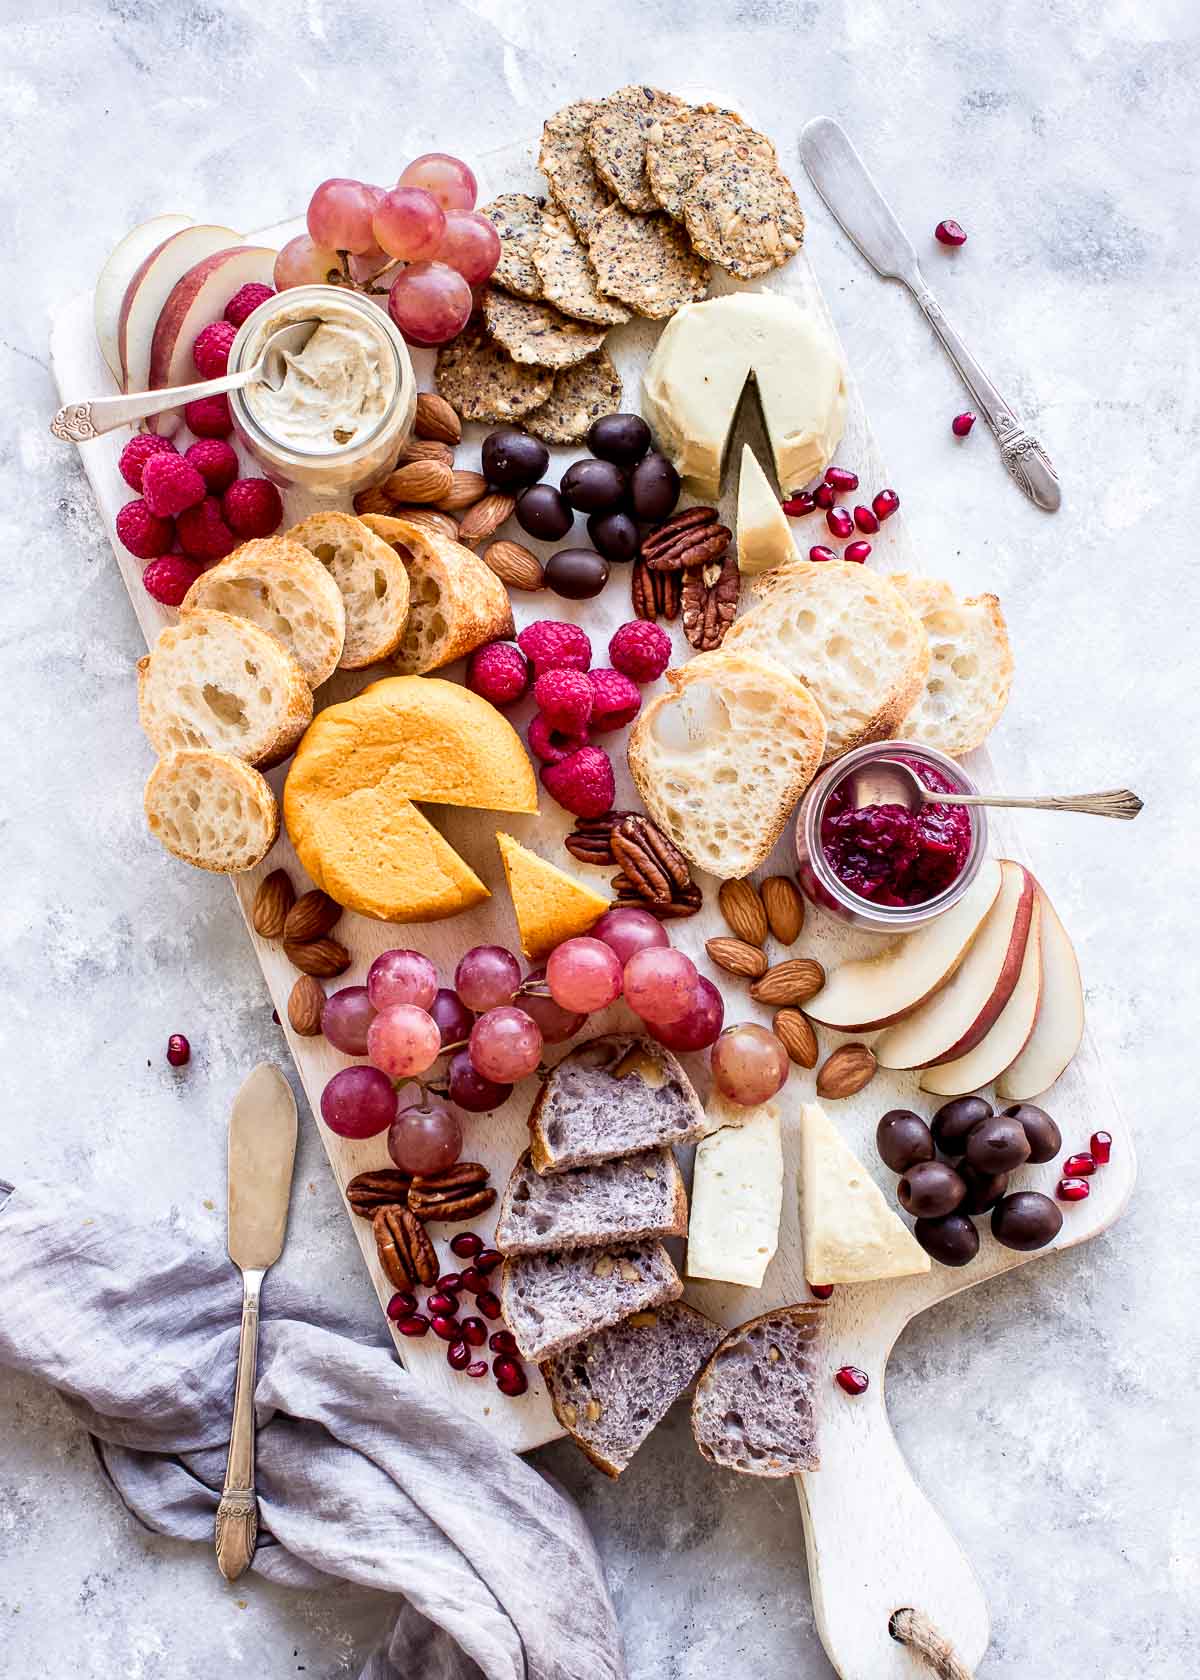 Vegan Cheese Board showing multiple hard cheeses, berries, bread and crackers.